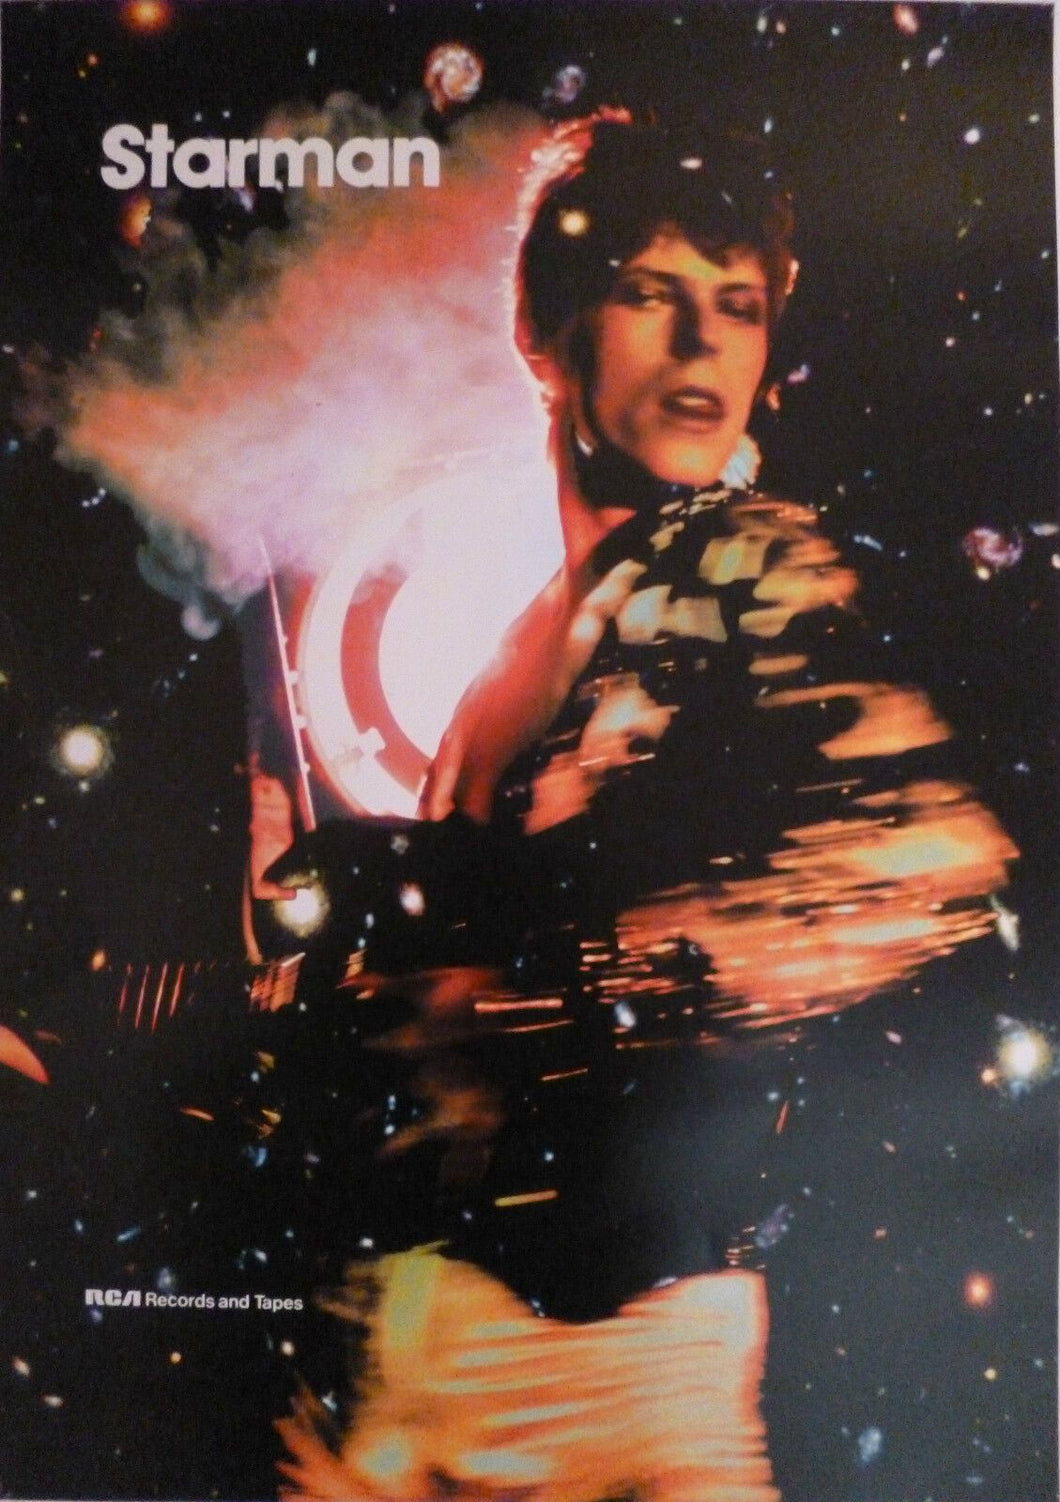 David Bowie poster - Fantastic Starman - Ziggy Stardust 1972 promo new design - Original Music and Movie Posters for sale from Bamalama - Online Poster Store UK London